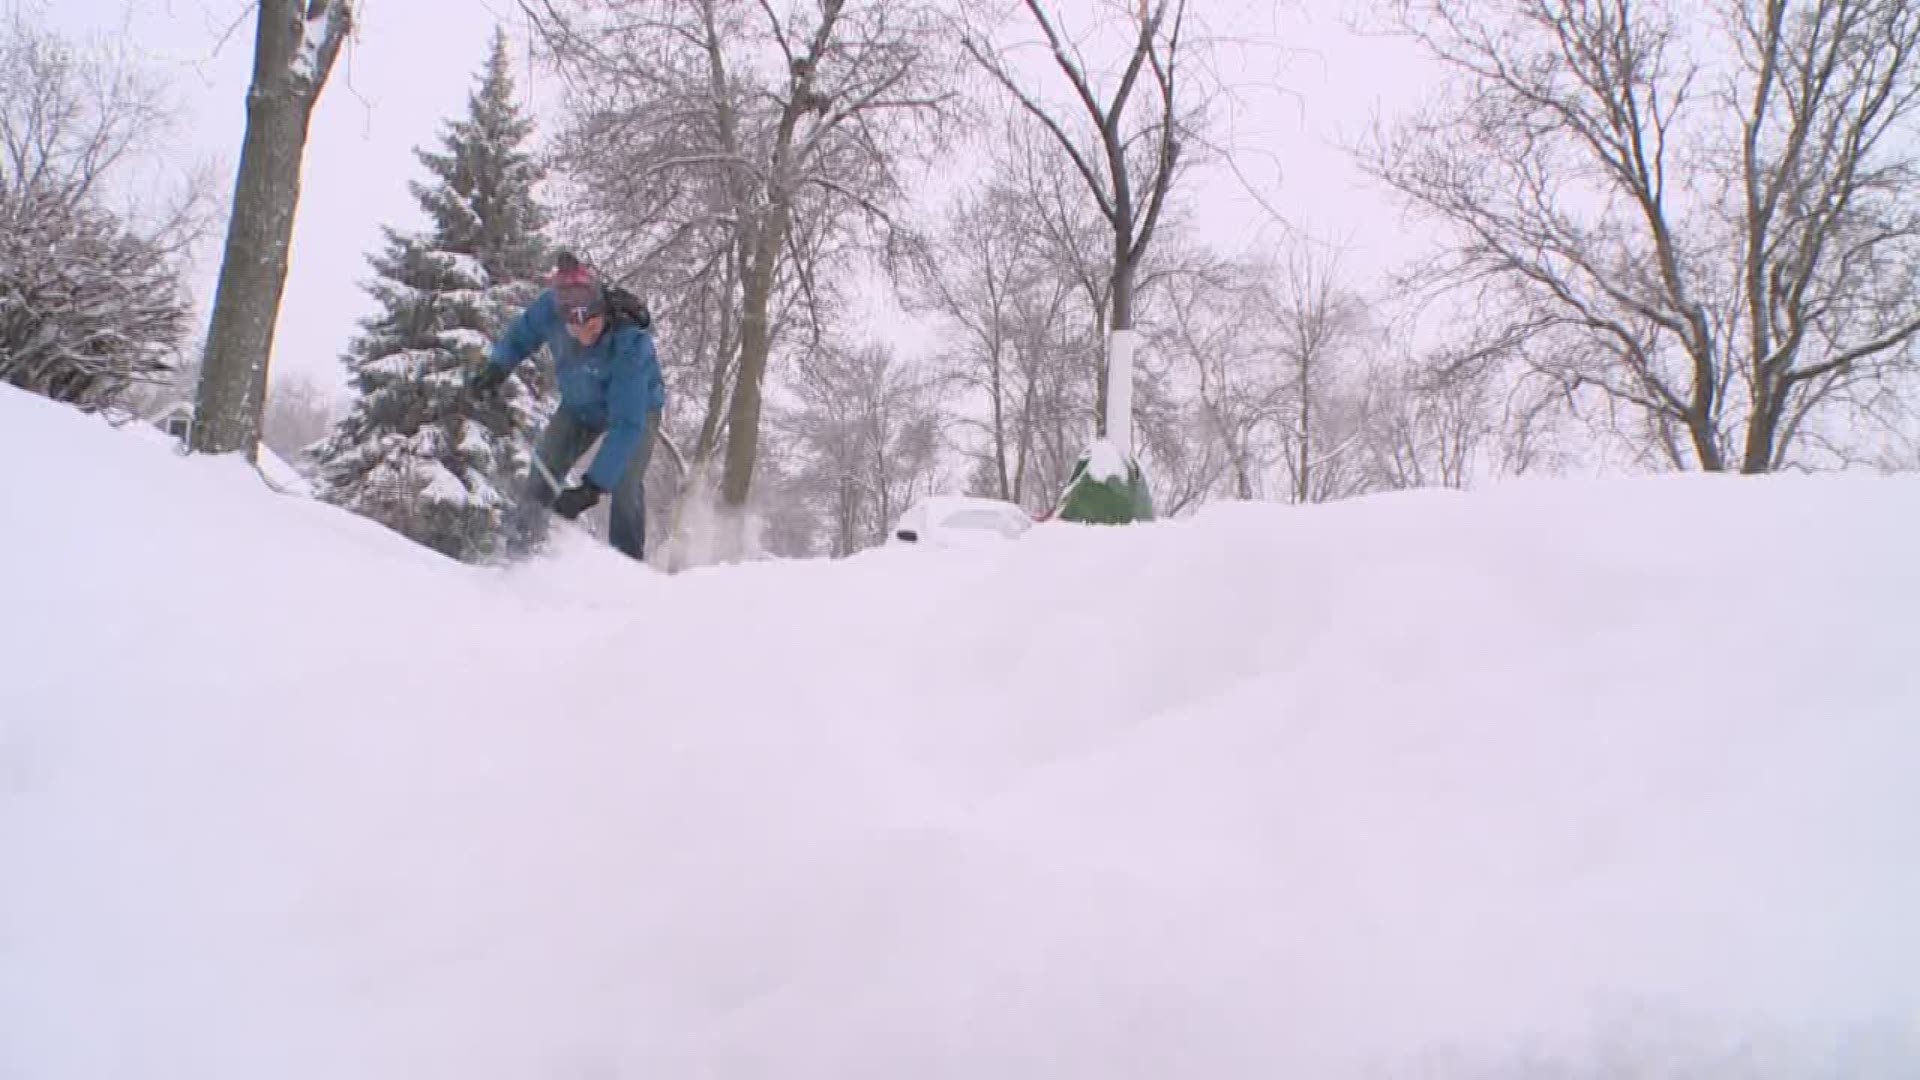 Random acts of kindness don't always have to involve financial help. KARE 11's Kris Laudien decided to do some shoveling - something we definitely need help with this winter! https://kare11.tv/2RTSzcB